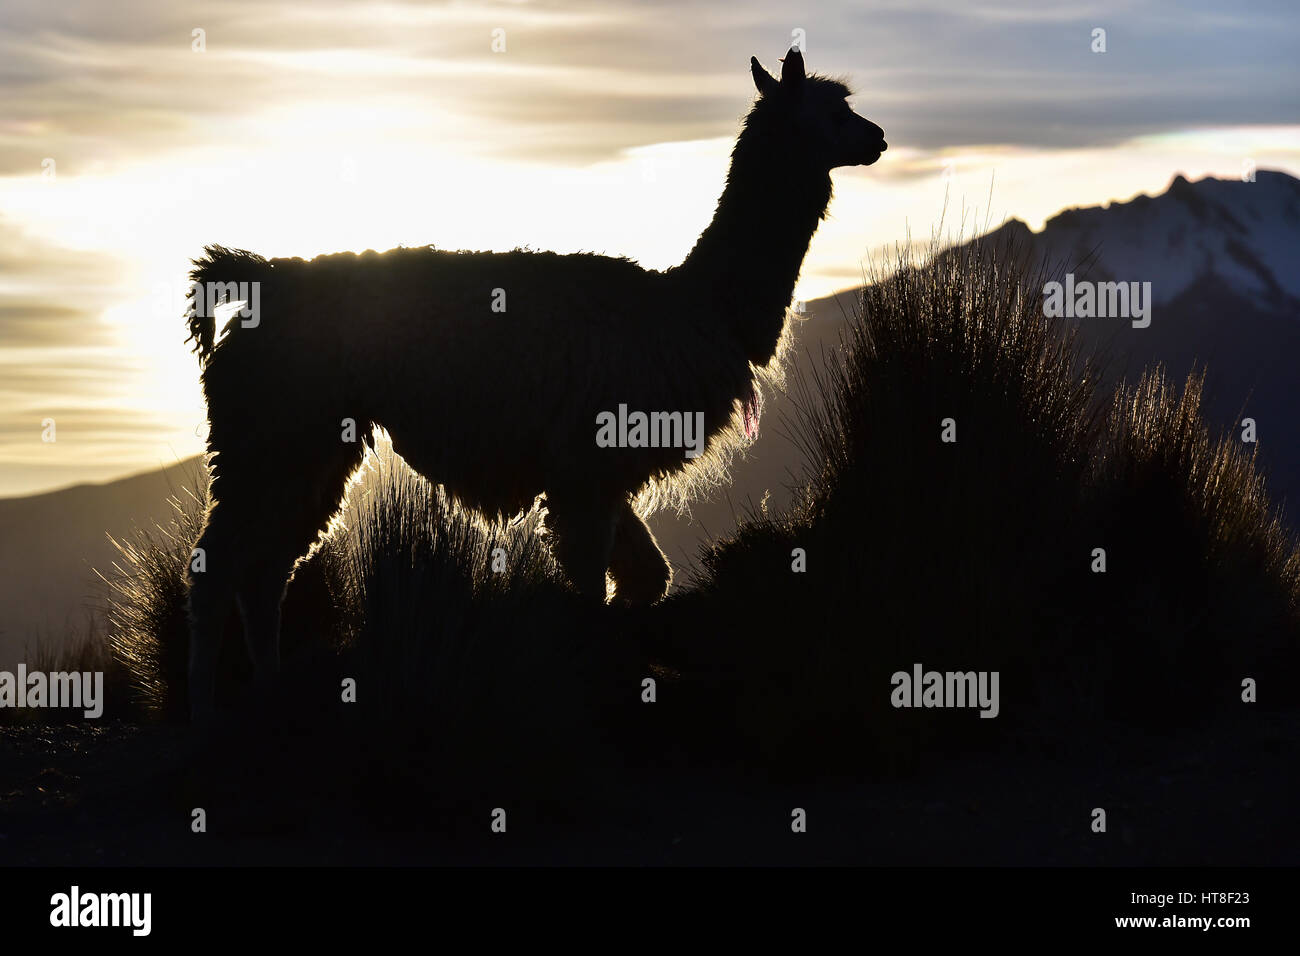 Llama (Lama glama) as a silhouette against the light in front of mountain, evening light, in Cusco, Andes, Peru Stock Photo